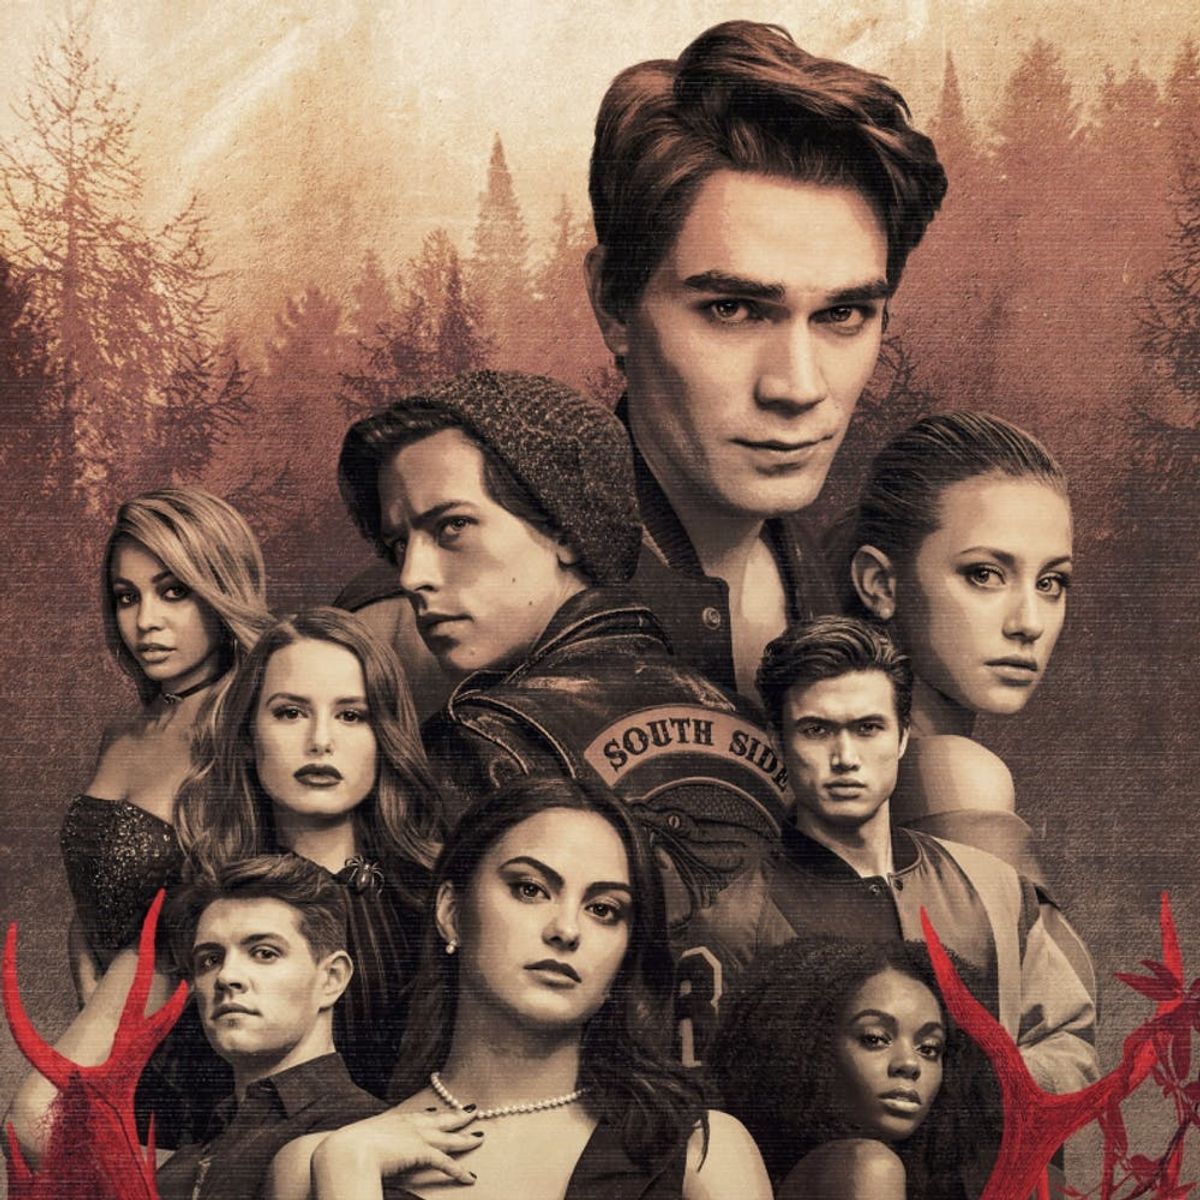 Brit + Co’s Weekly Entertainment Planner: ‘Riverdale’ Season 3, ‘First Man,’ and More!